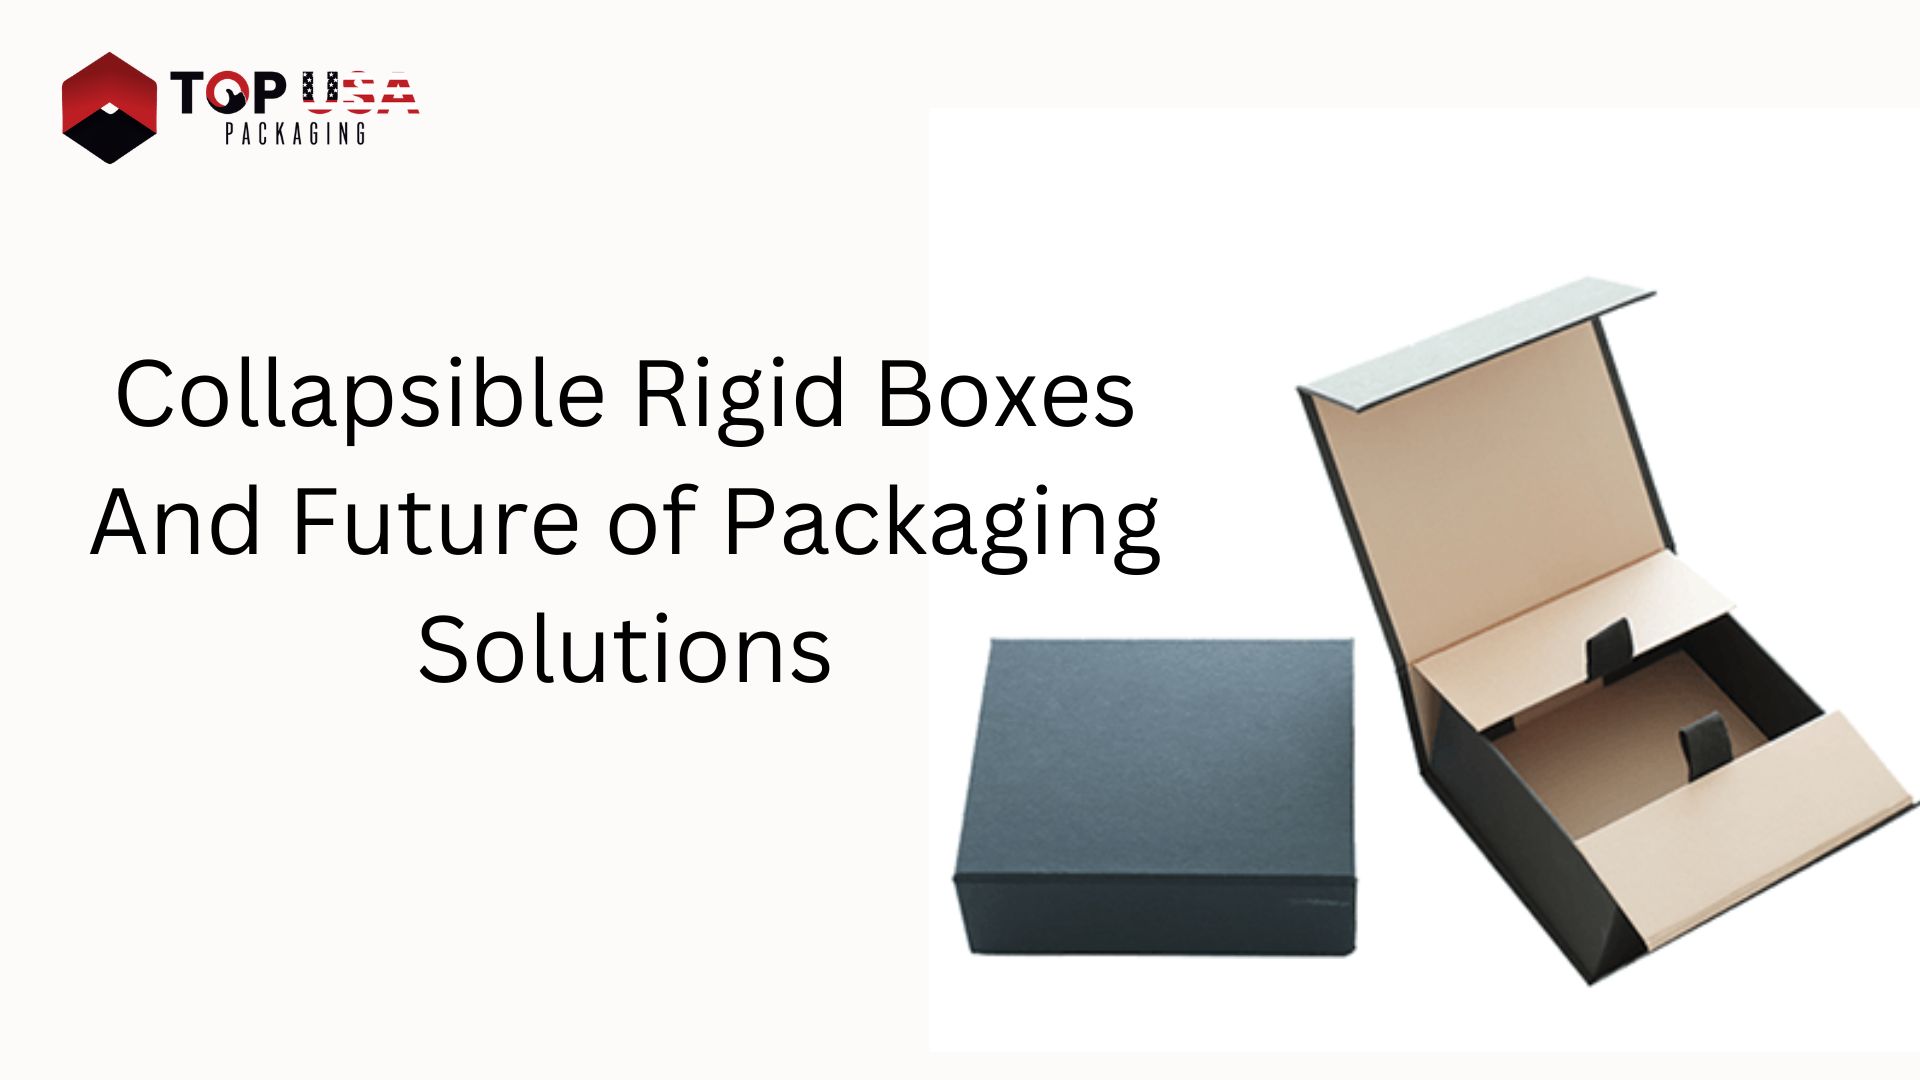 Collapsible Rigid Boxes And Future of Packaging Solutions